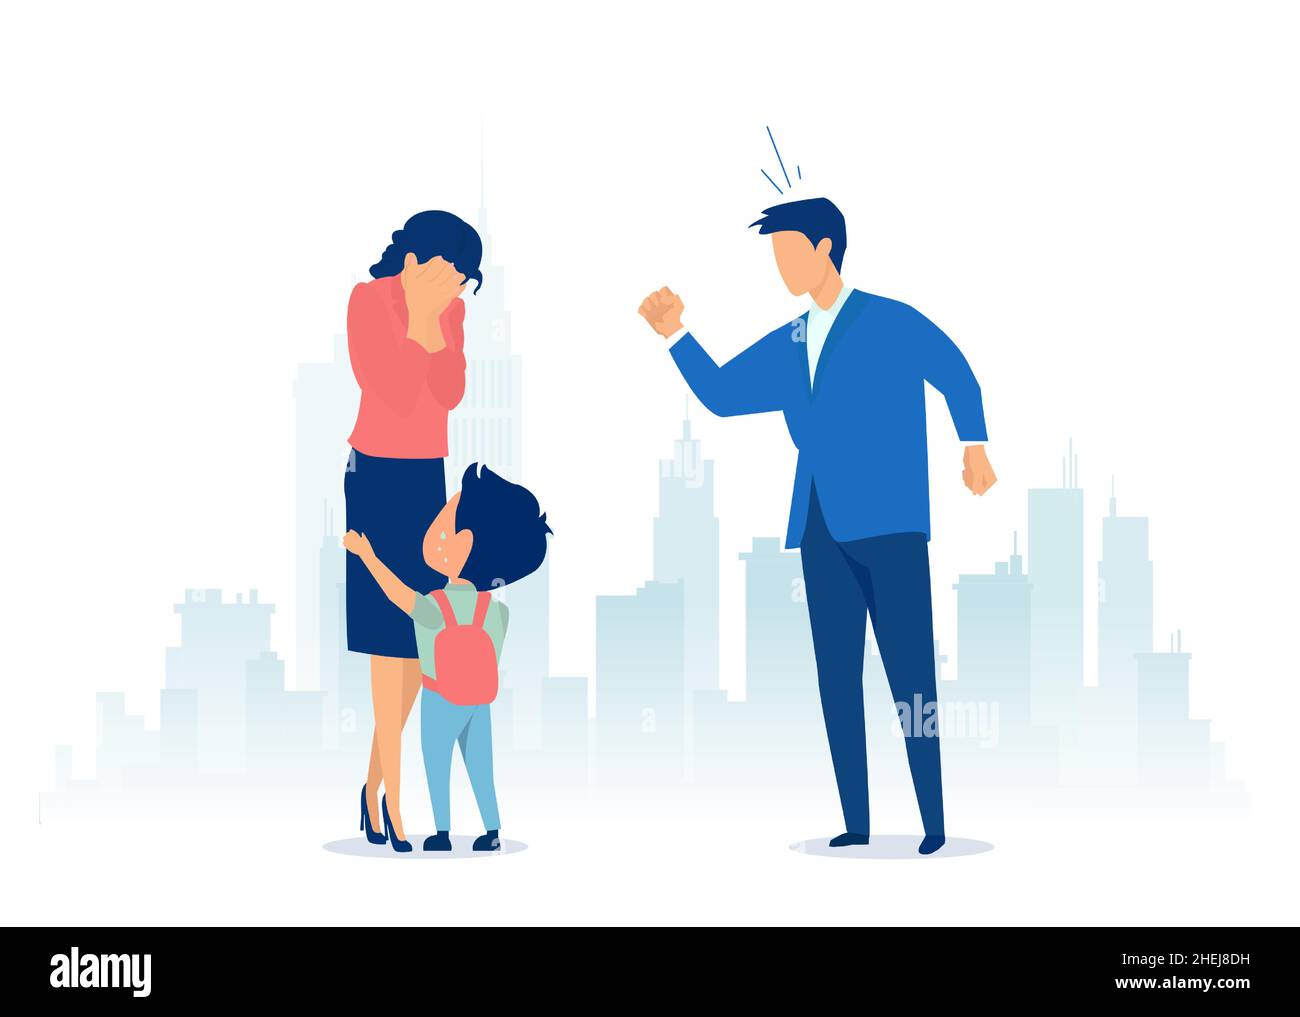 Vector of a father yelling at a mother with child. Family conflict and domestic violence concept Stock Vector